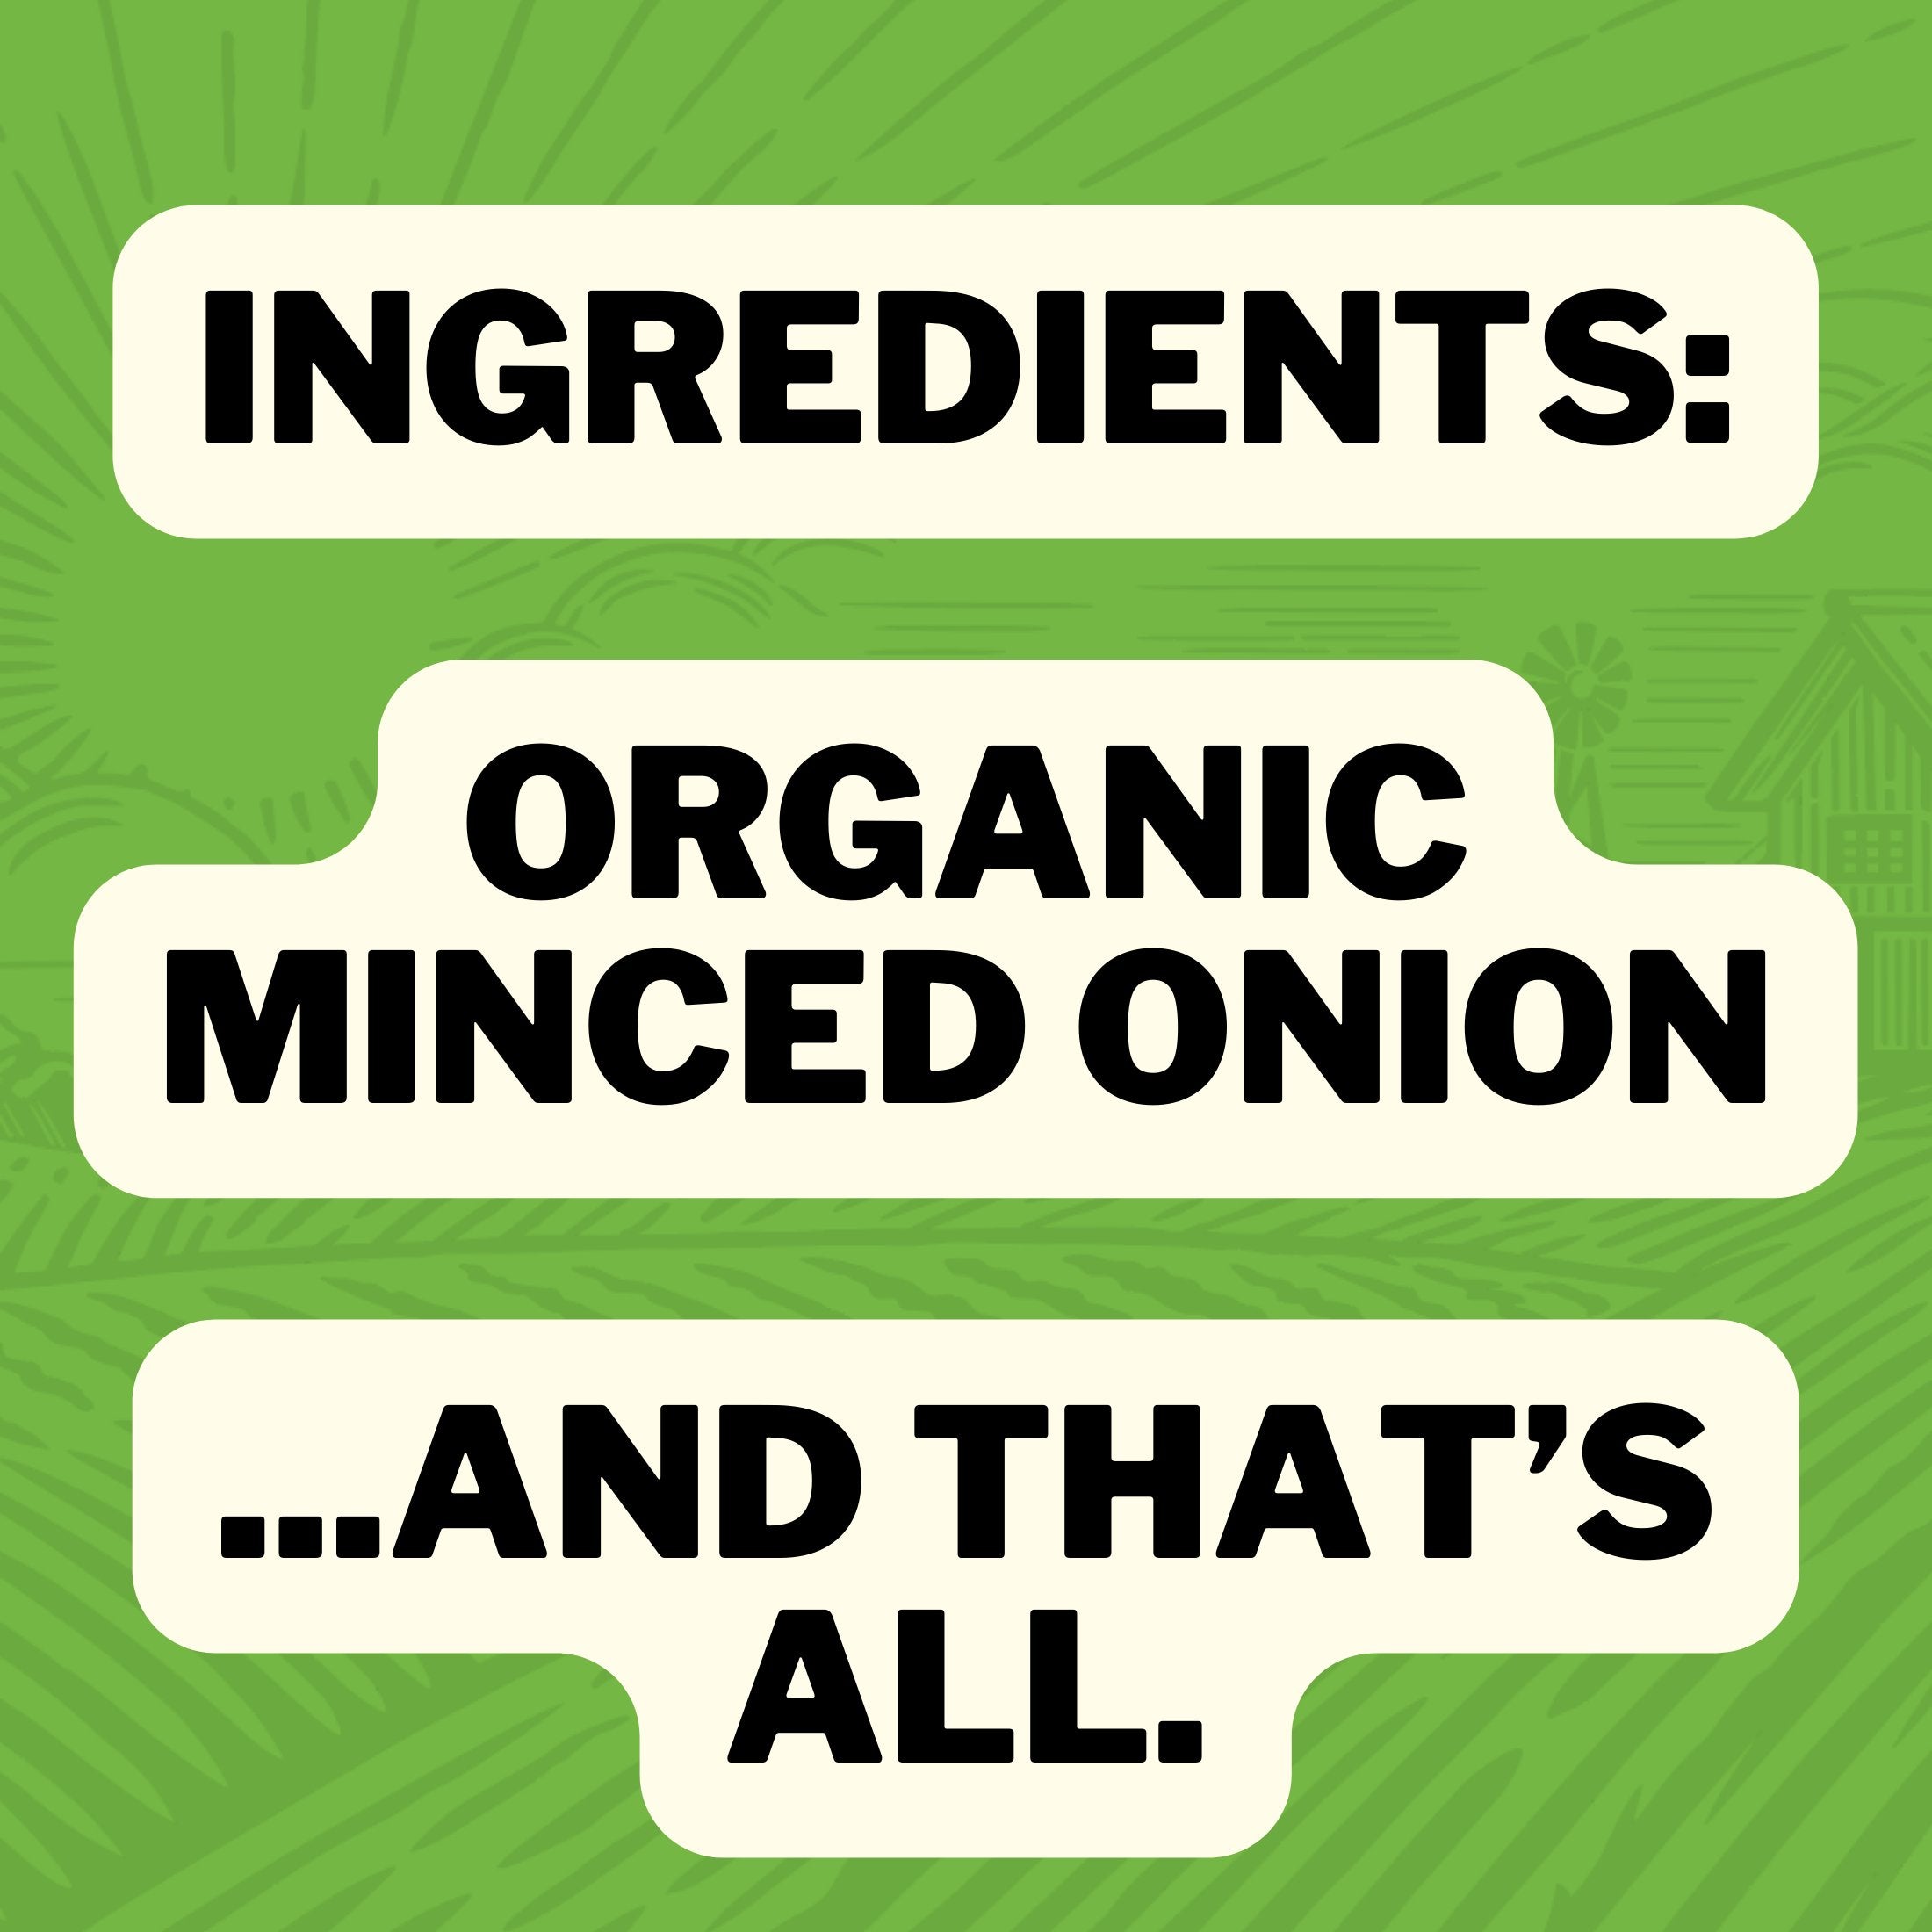 Ingredients: Organic Minced Onion ... and That's All